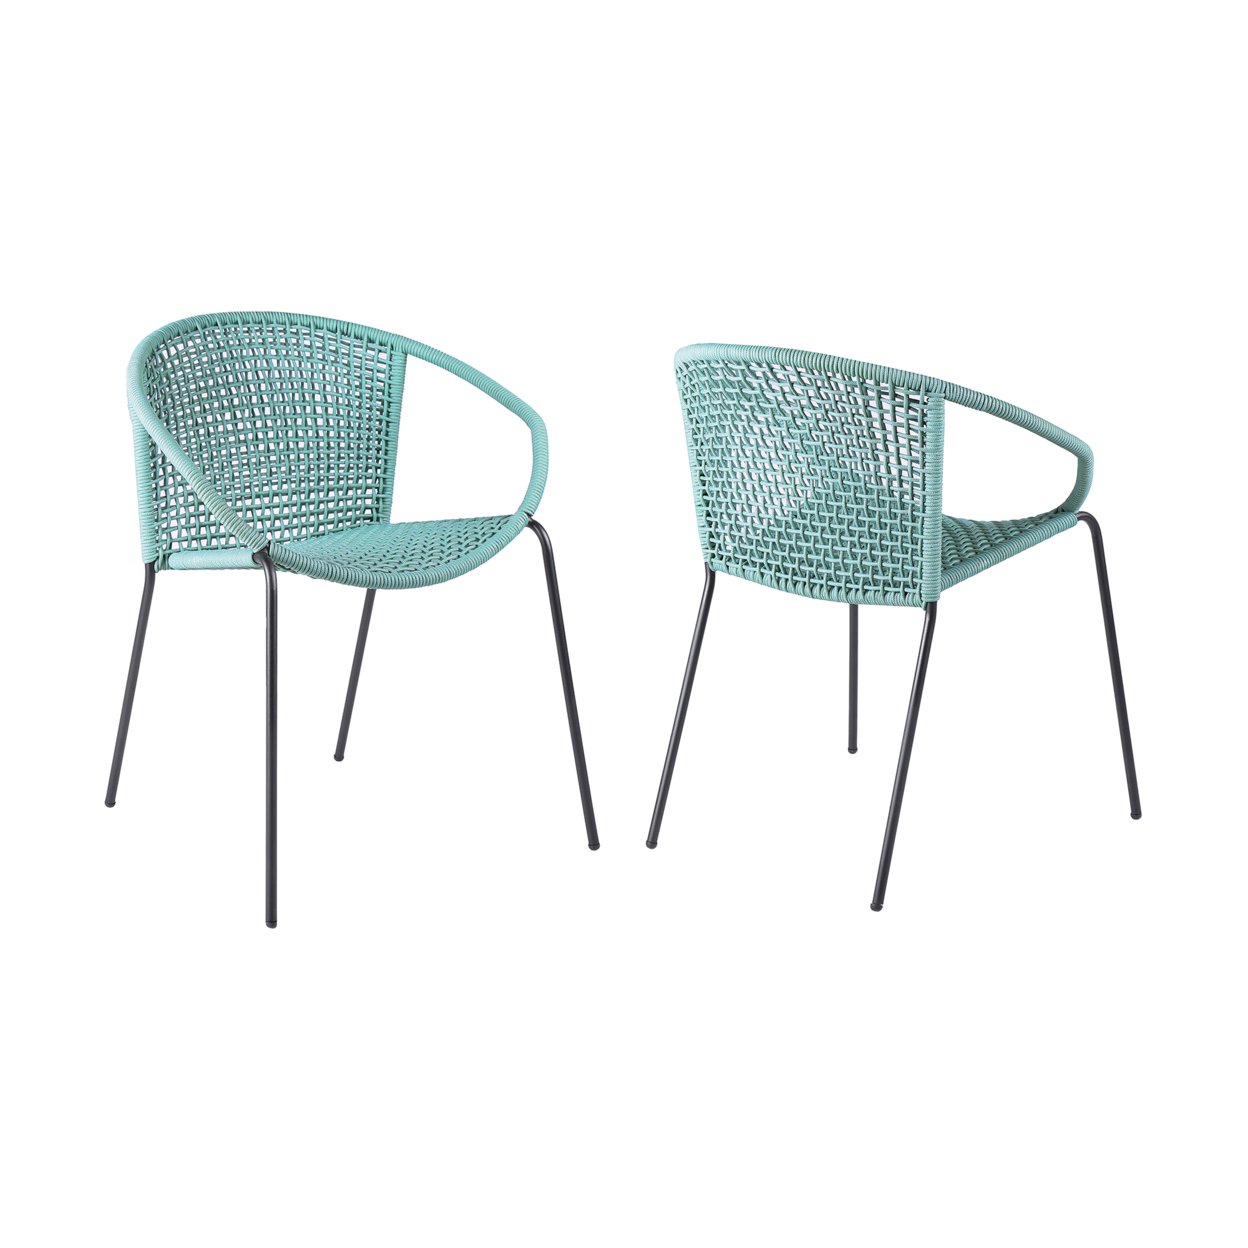 Dining Chair With Interwoven Geometric Seat And Back, Set Of 2, Blue- Saltoro Sherpi